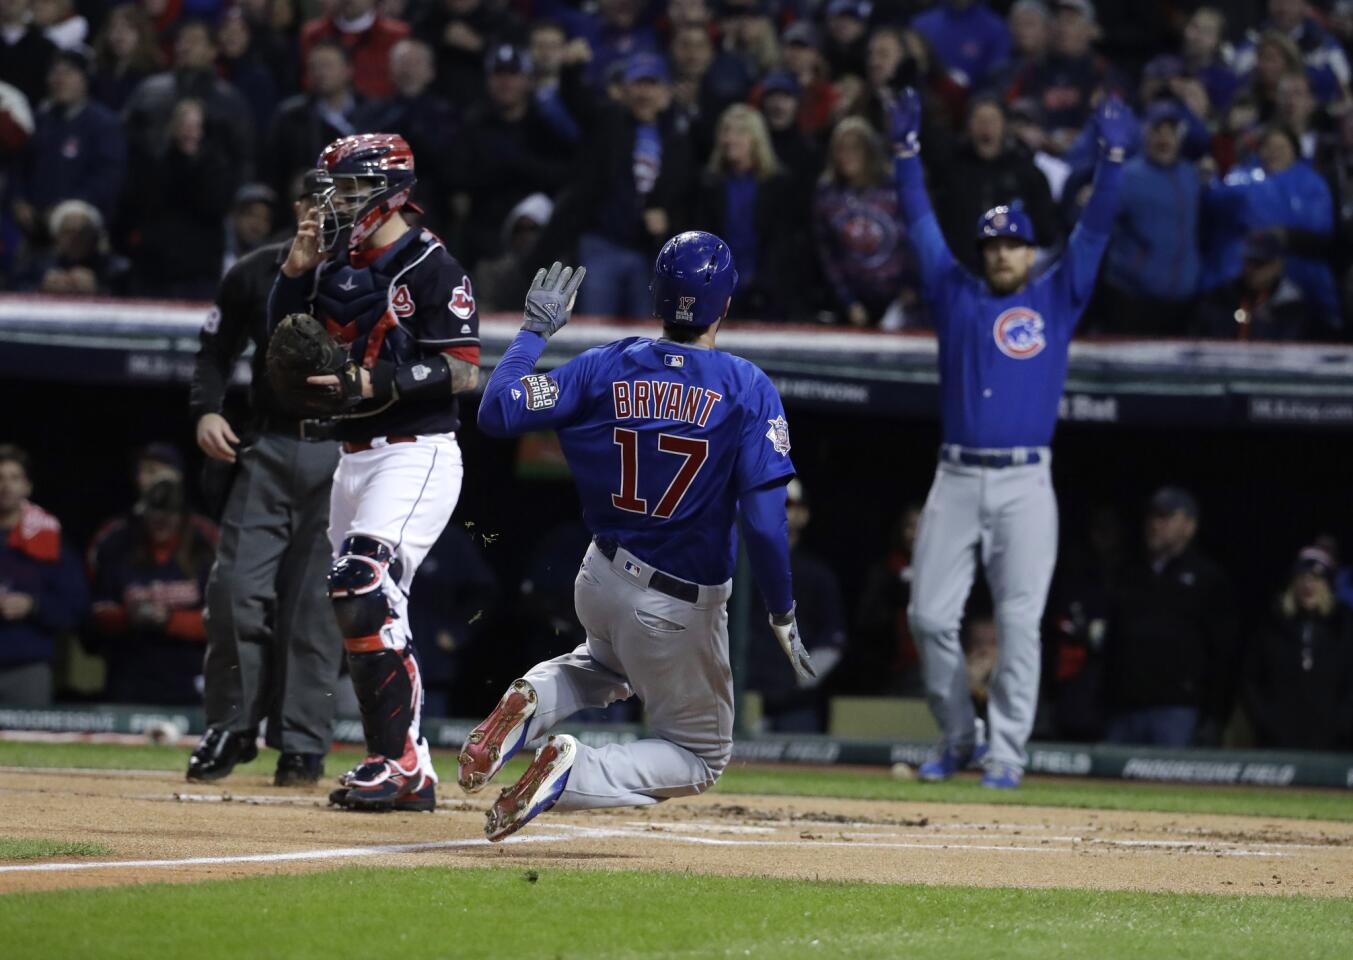 World Series Game 2: Cubs 5, Indians 1